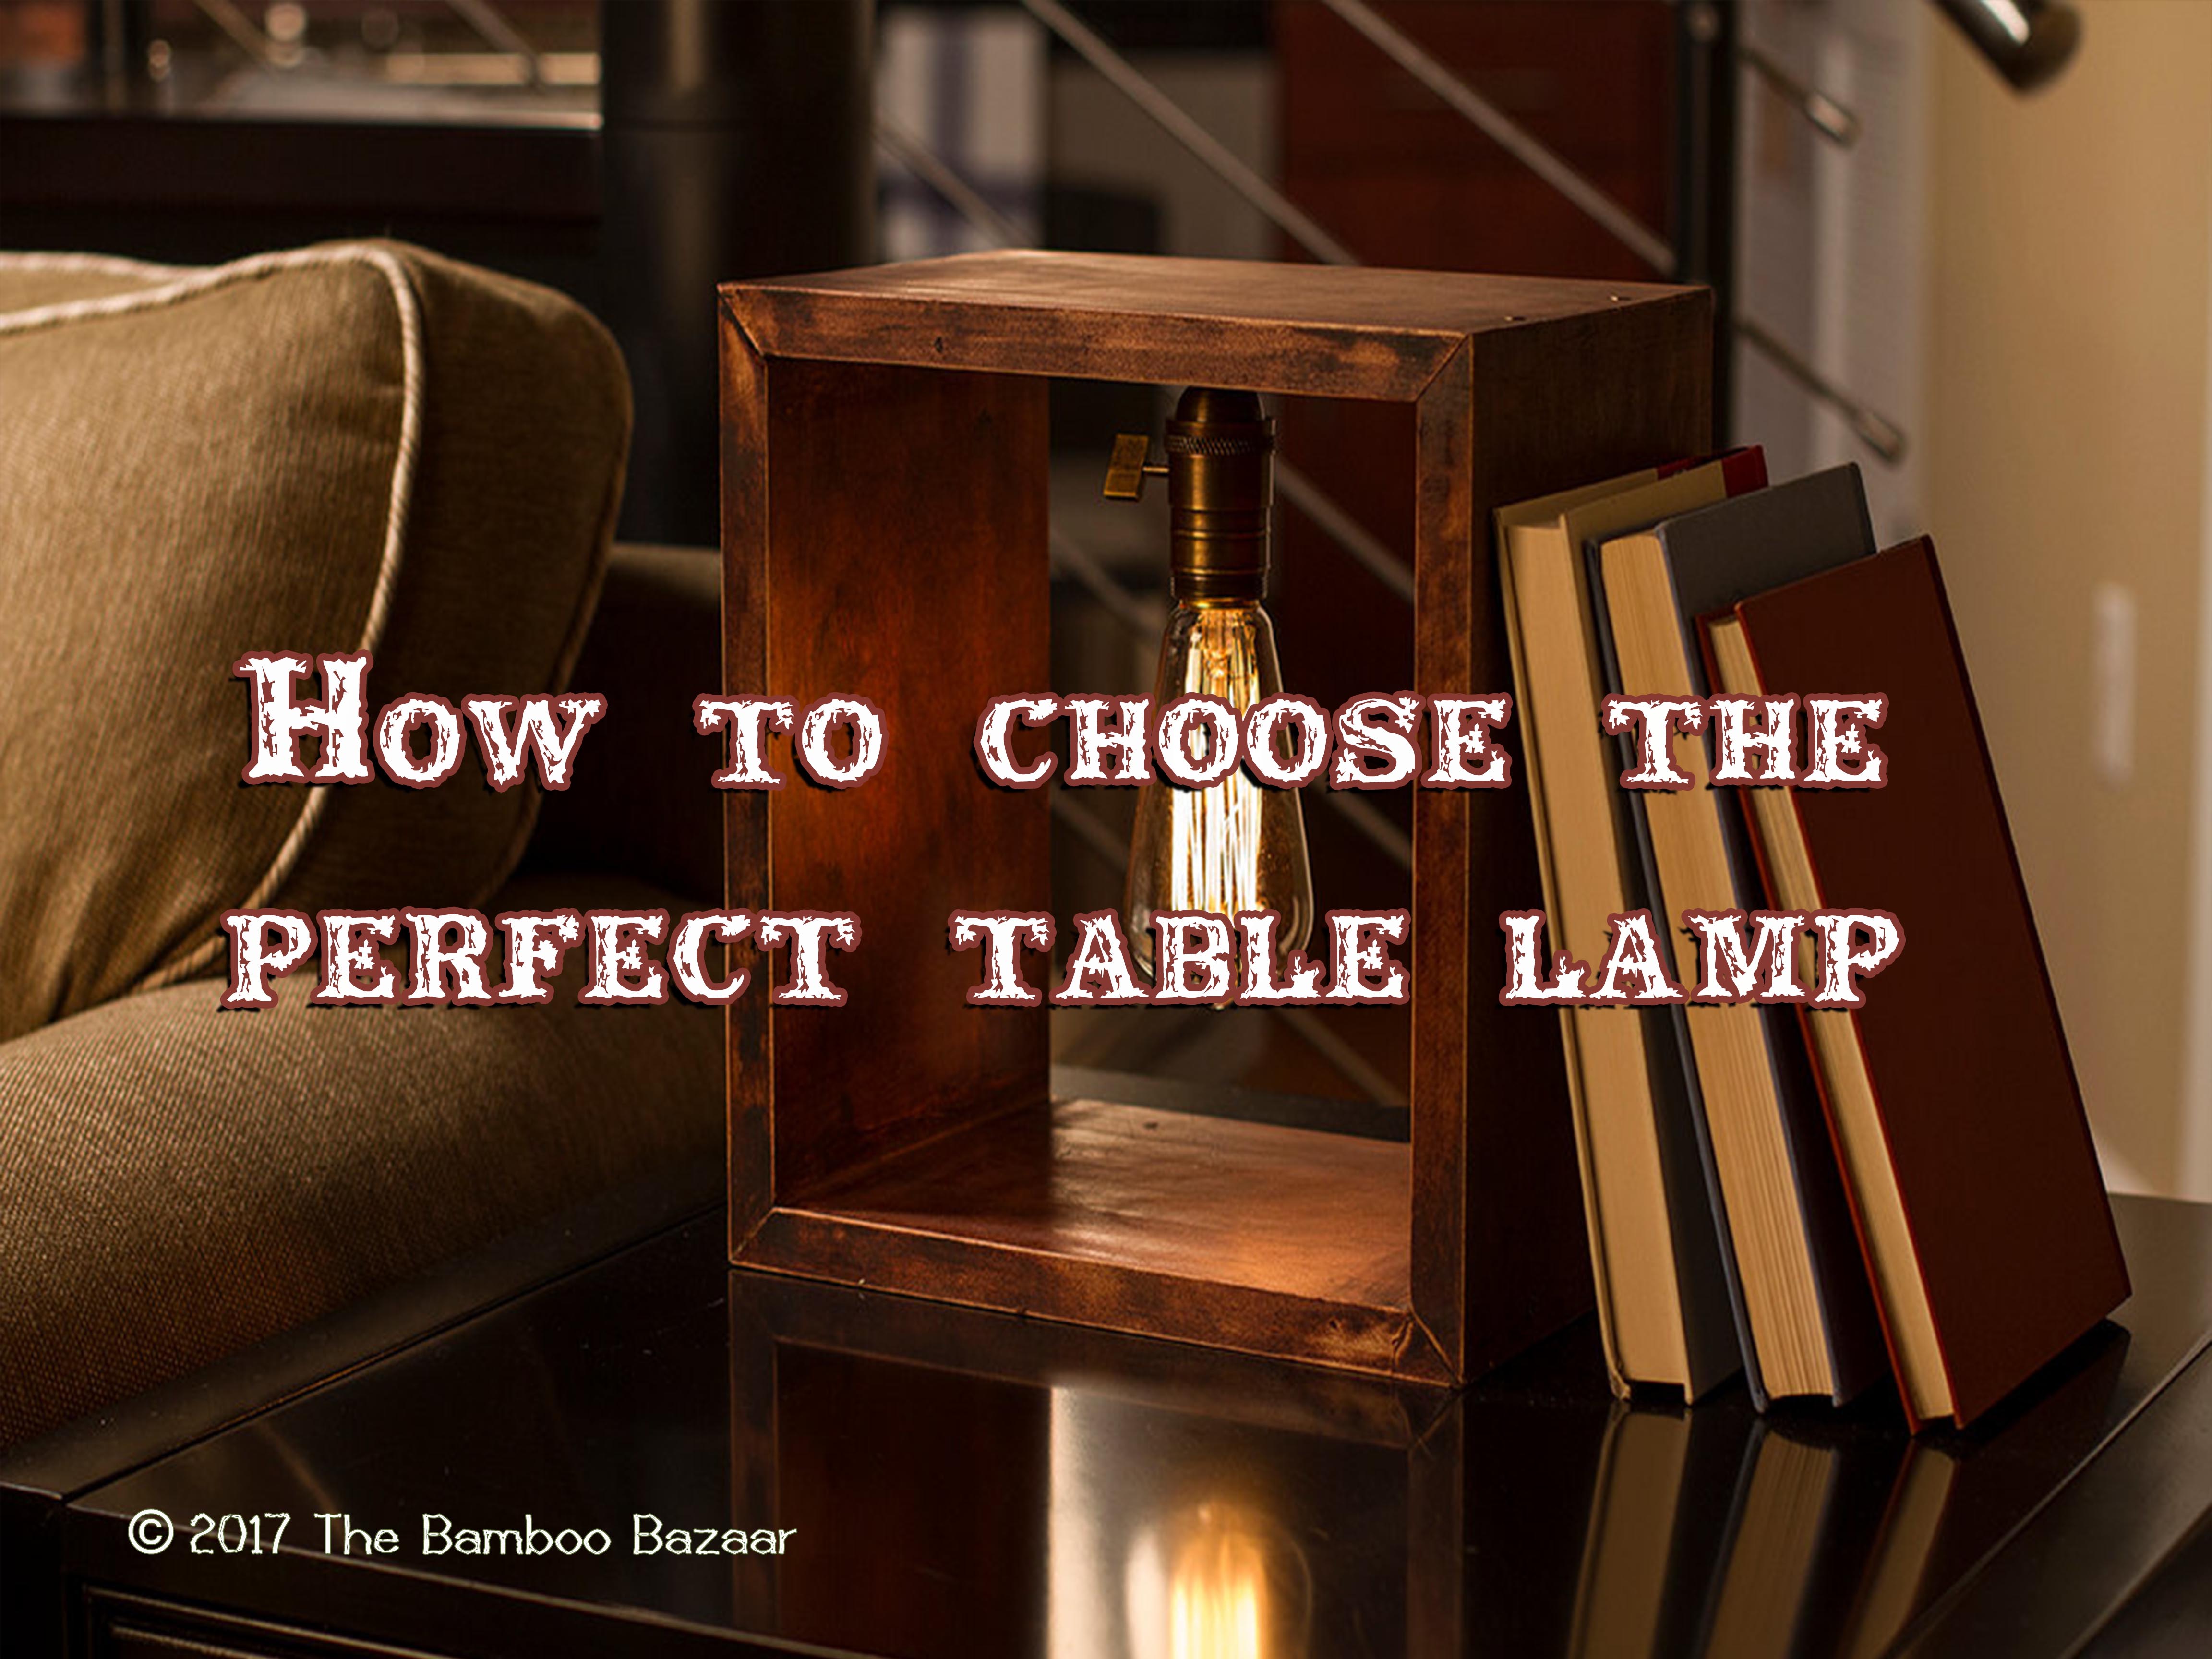 How to choose the perfect table lamp